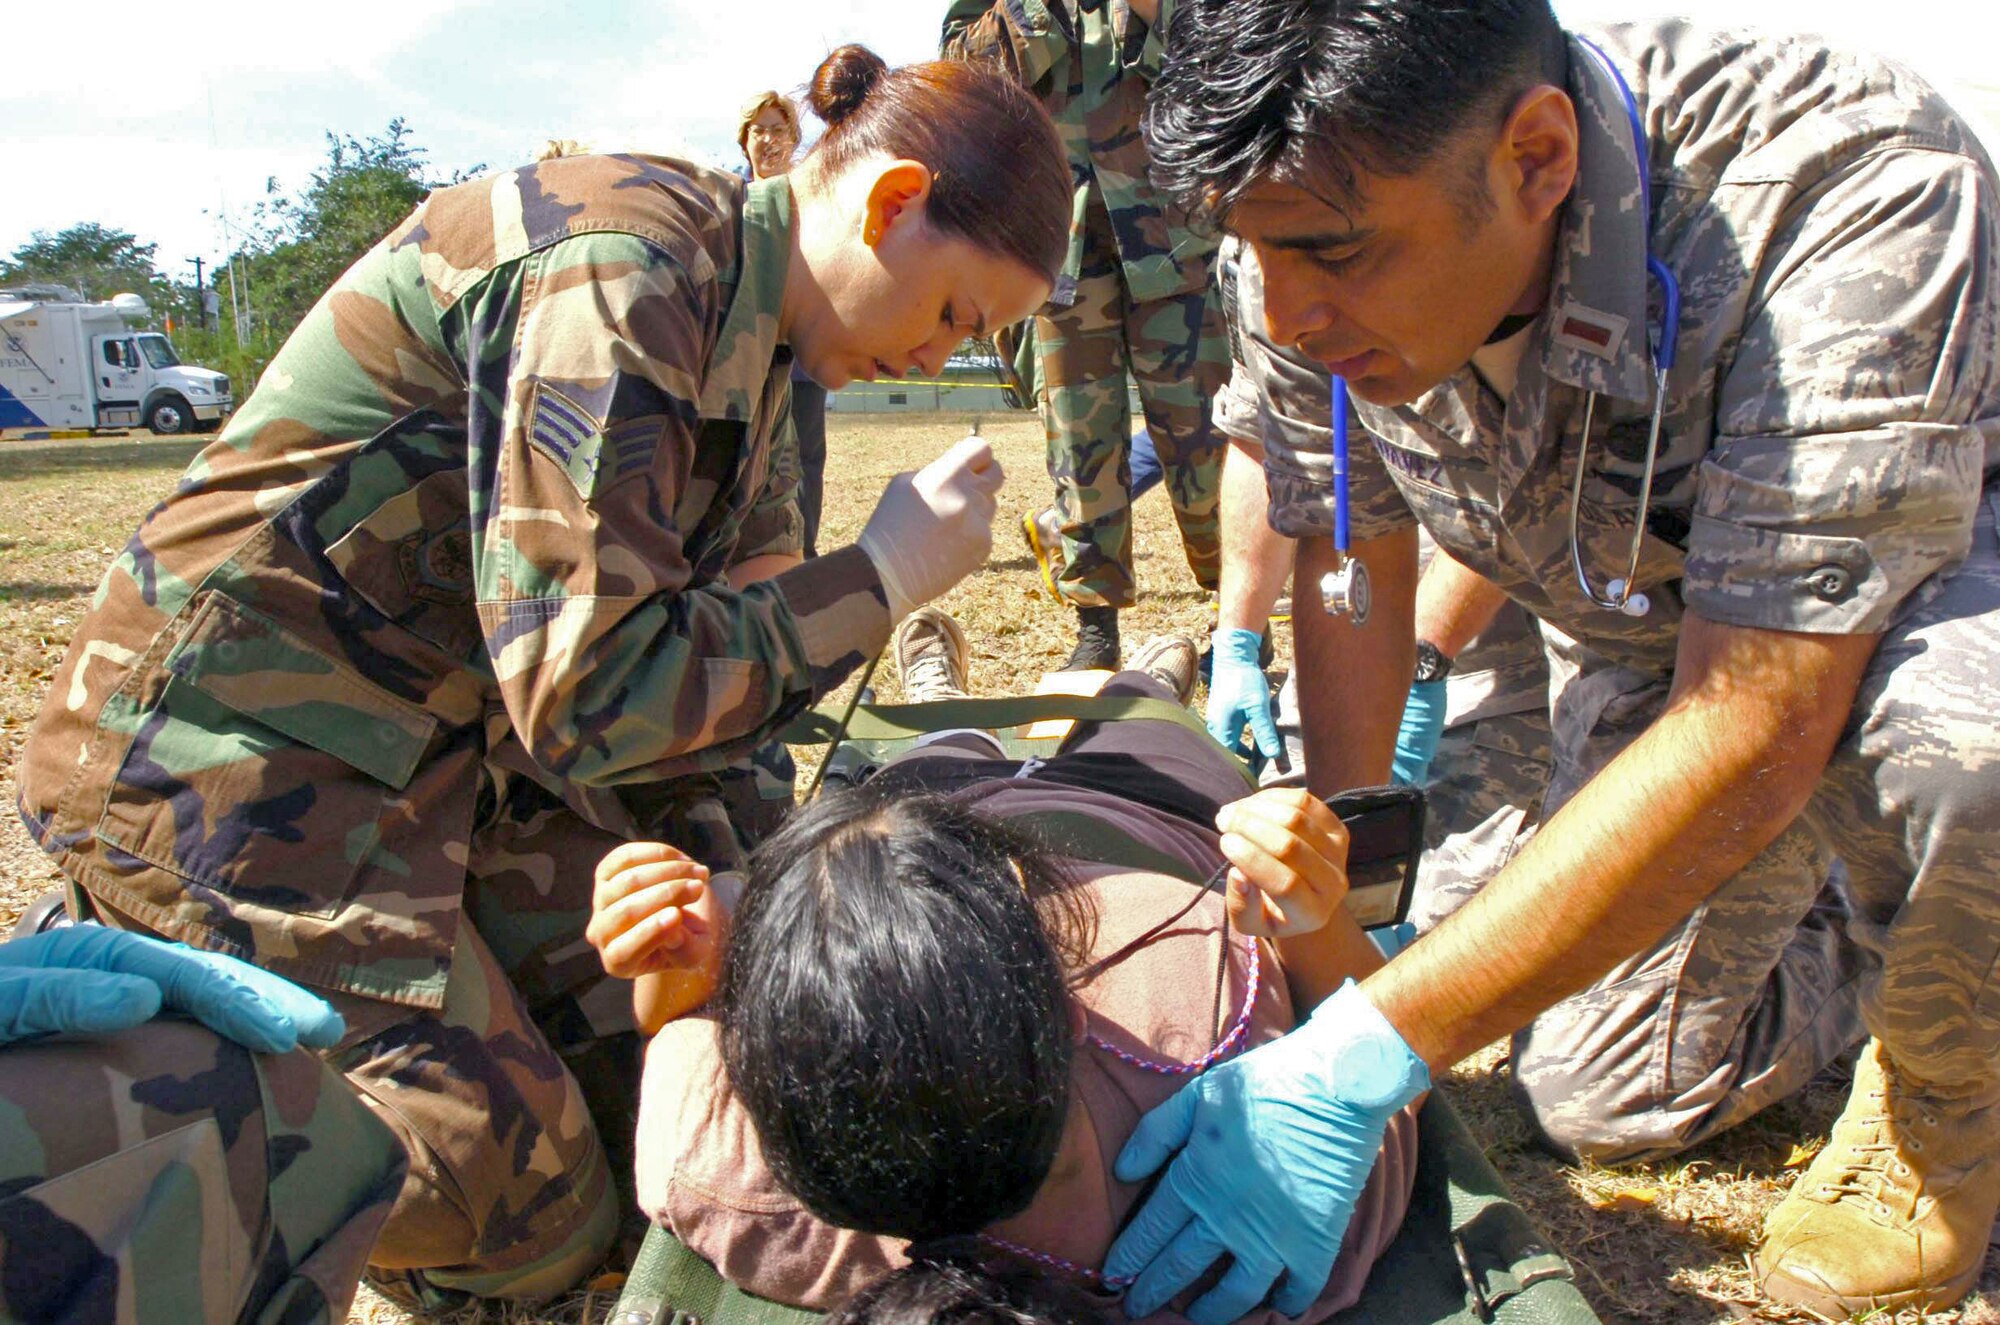 Senior Airman Kara Nicholas and 2nd Lt. Tomas Chavez check the vital signs of an incoming patient during Exercise Vigilant Guard March 25 in Camp Santiago, Puerto Rico. Airman Nicholas is a medic, and Lieutenant Chavez is a flight surgeon candidate. Both are from the 161st Air Refueling Wing from the Arizona National Guard. (U.S. Army photo/Staff Sgt. S. Patrick McCollum) 
